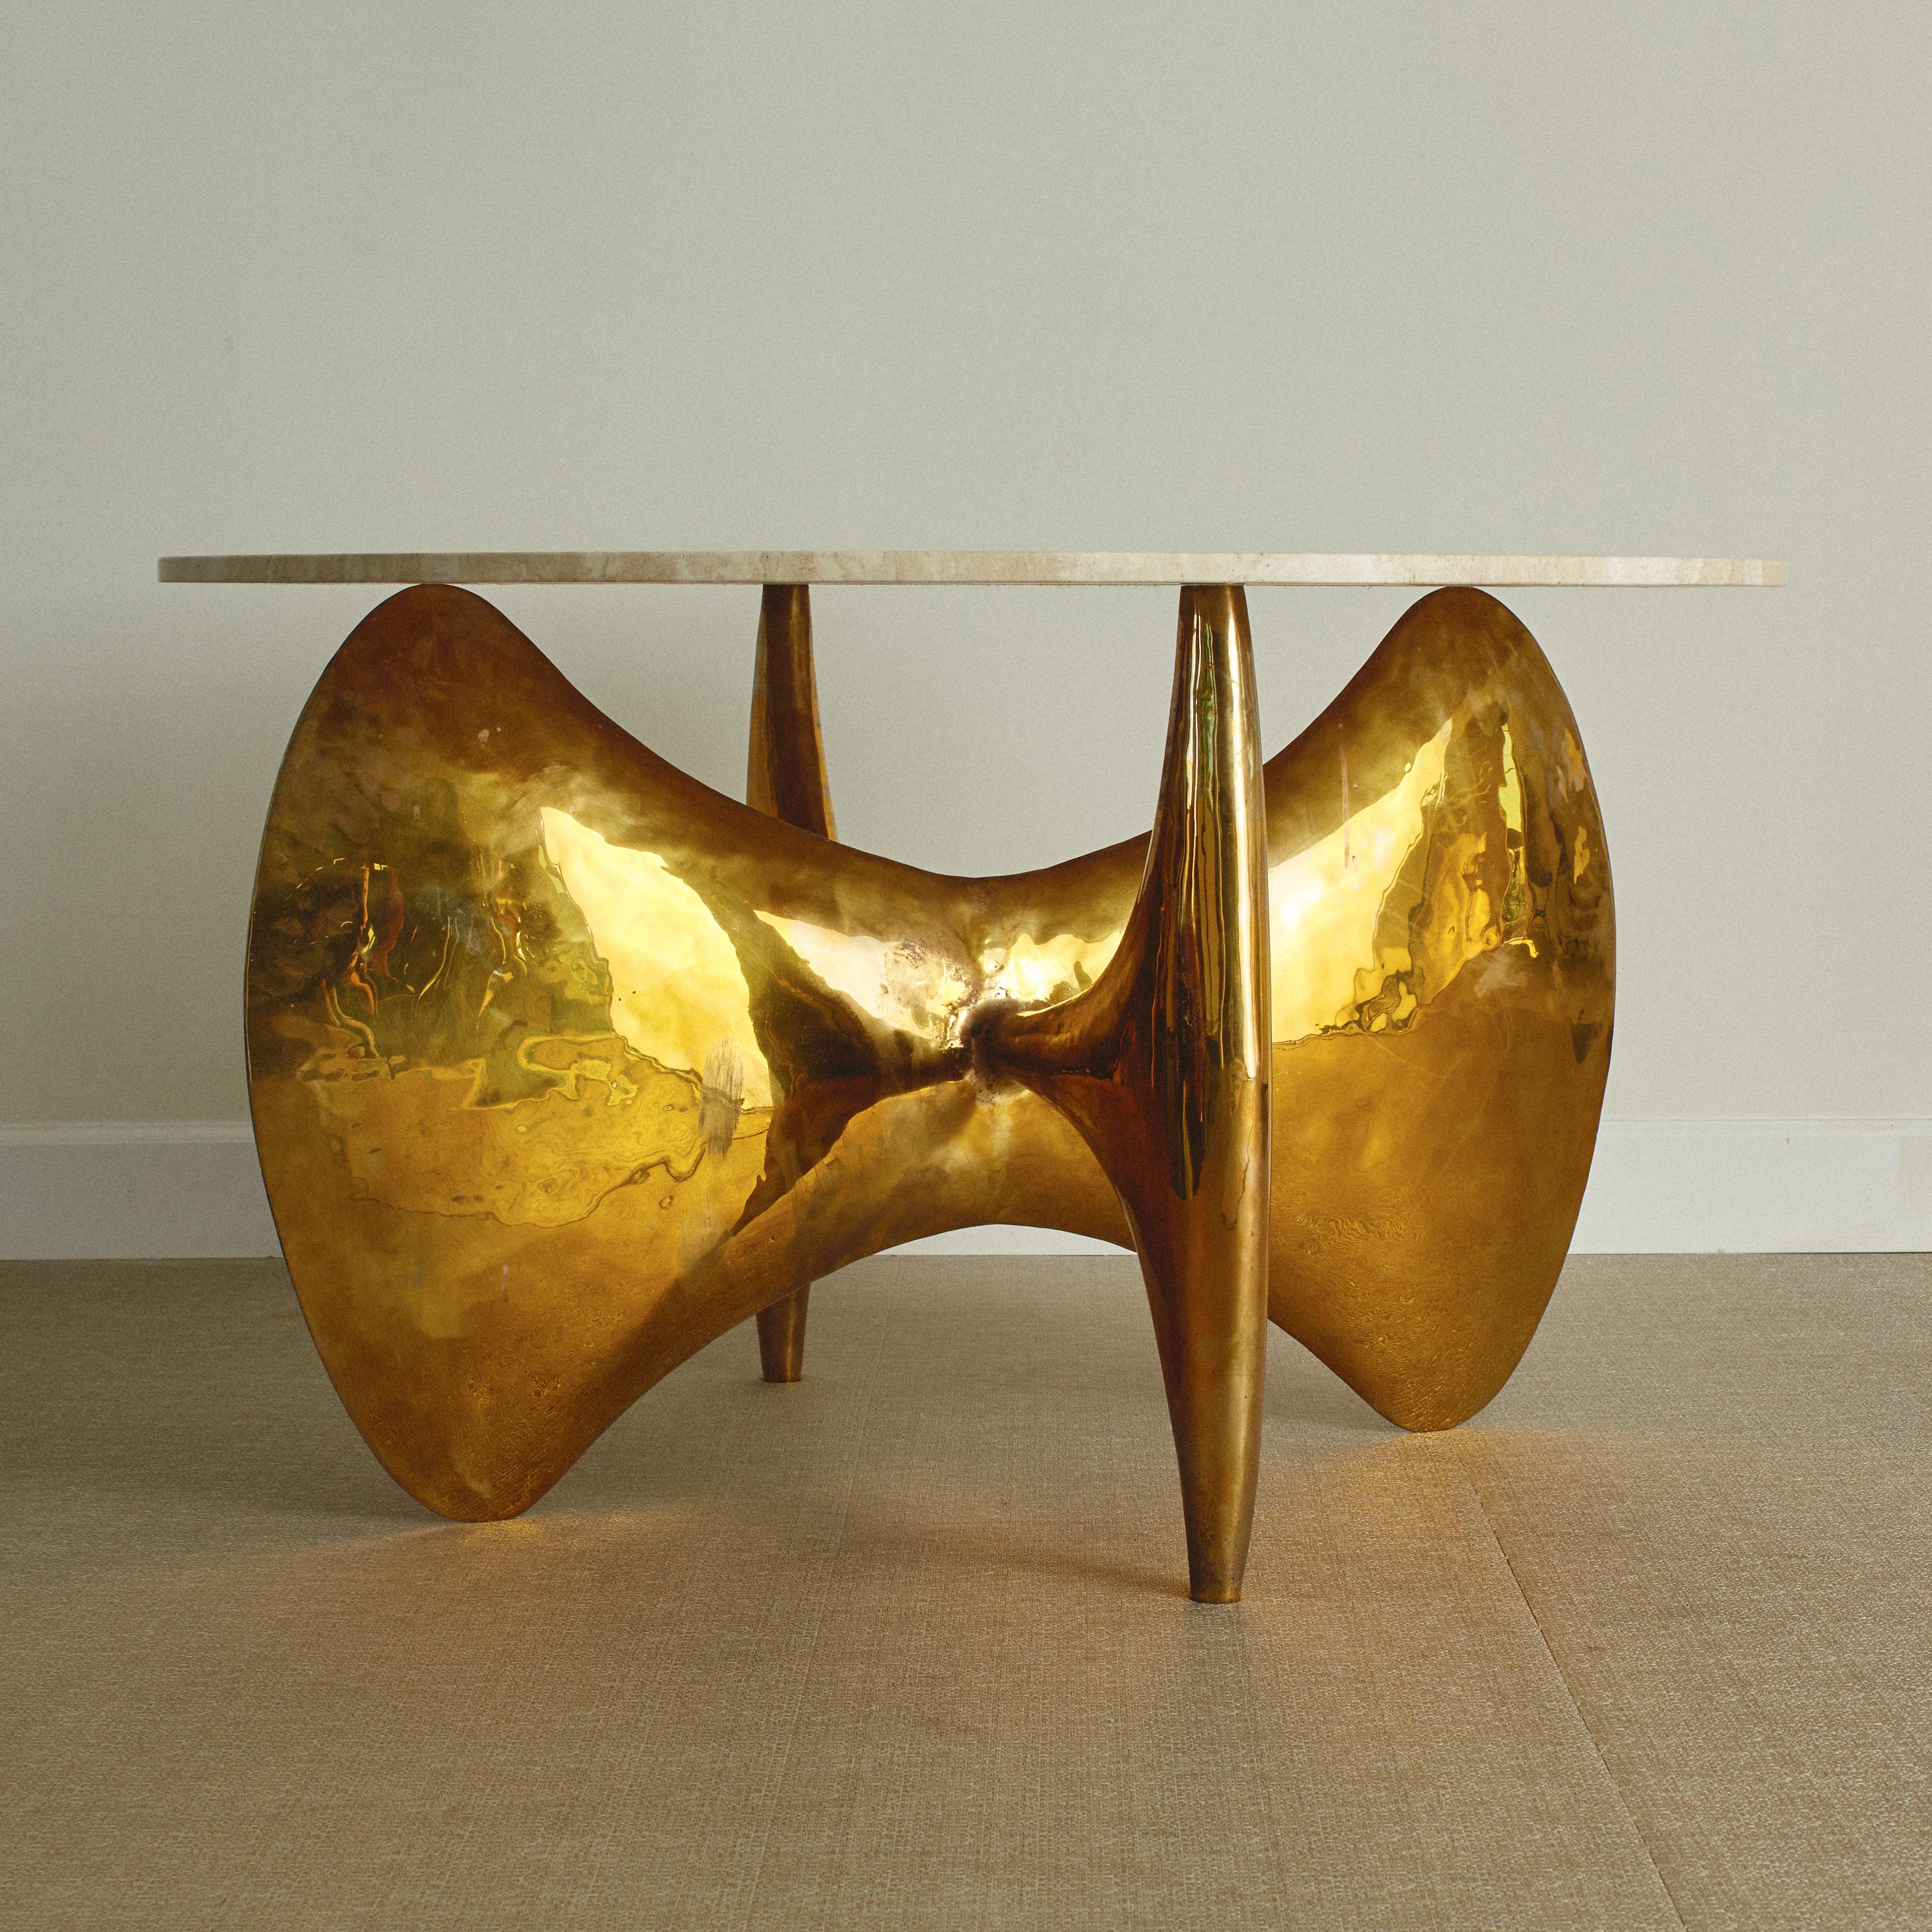 Philippe Hiquily was a French artist and designer known for biomorphic furniture and sculptures. He was able to combine modernist design, insect physiognomy, and human sexuality, to produce unique Surrealist works.

This piece is a limited edition